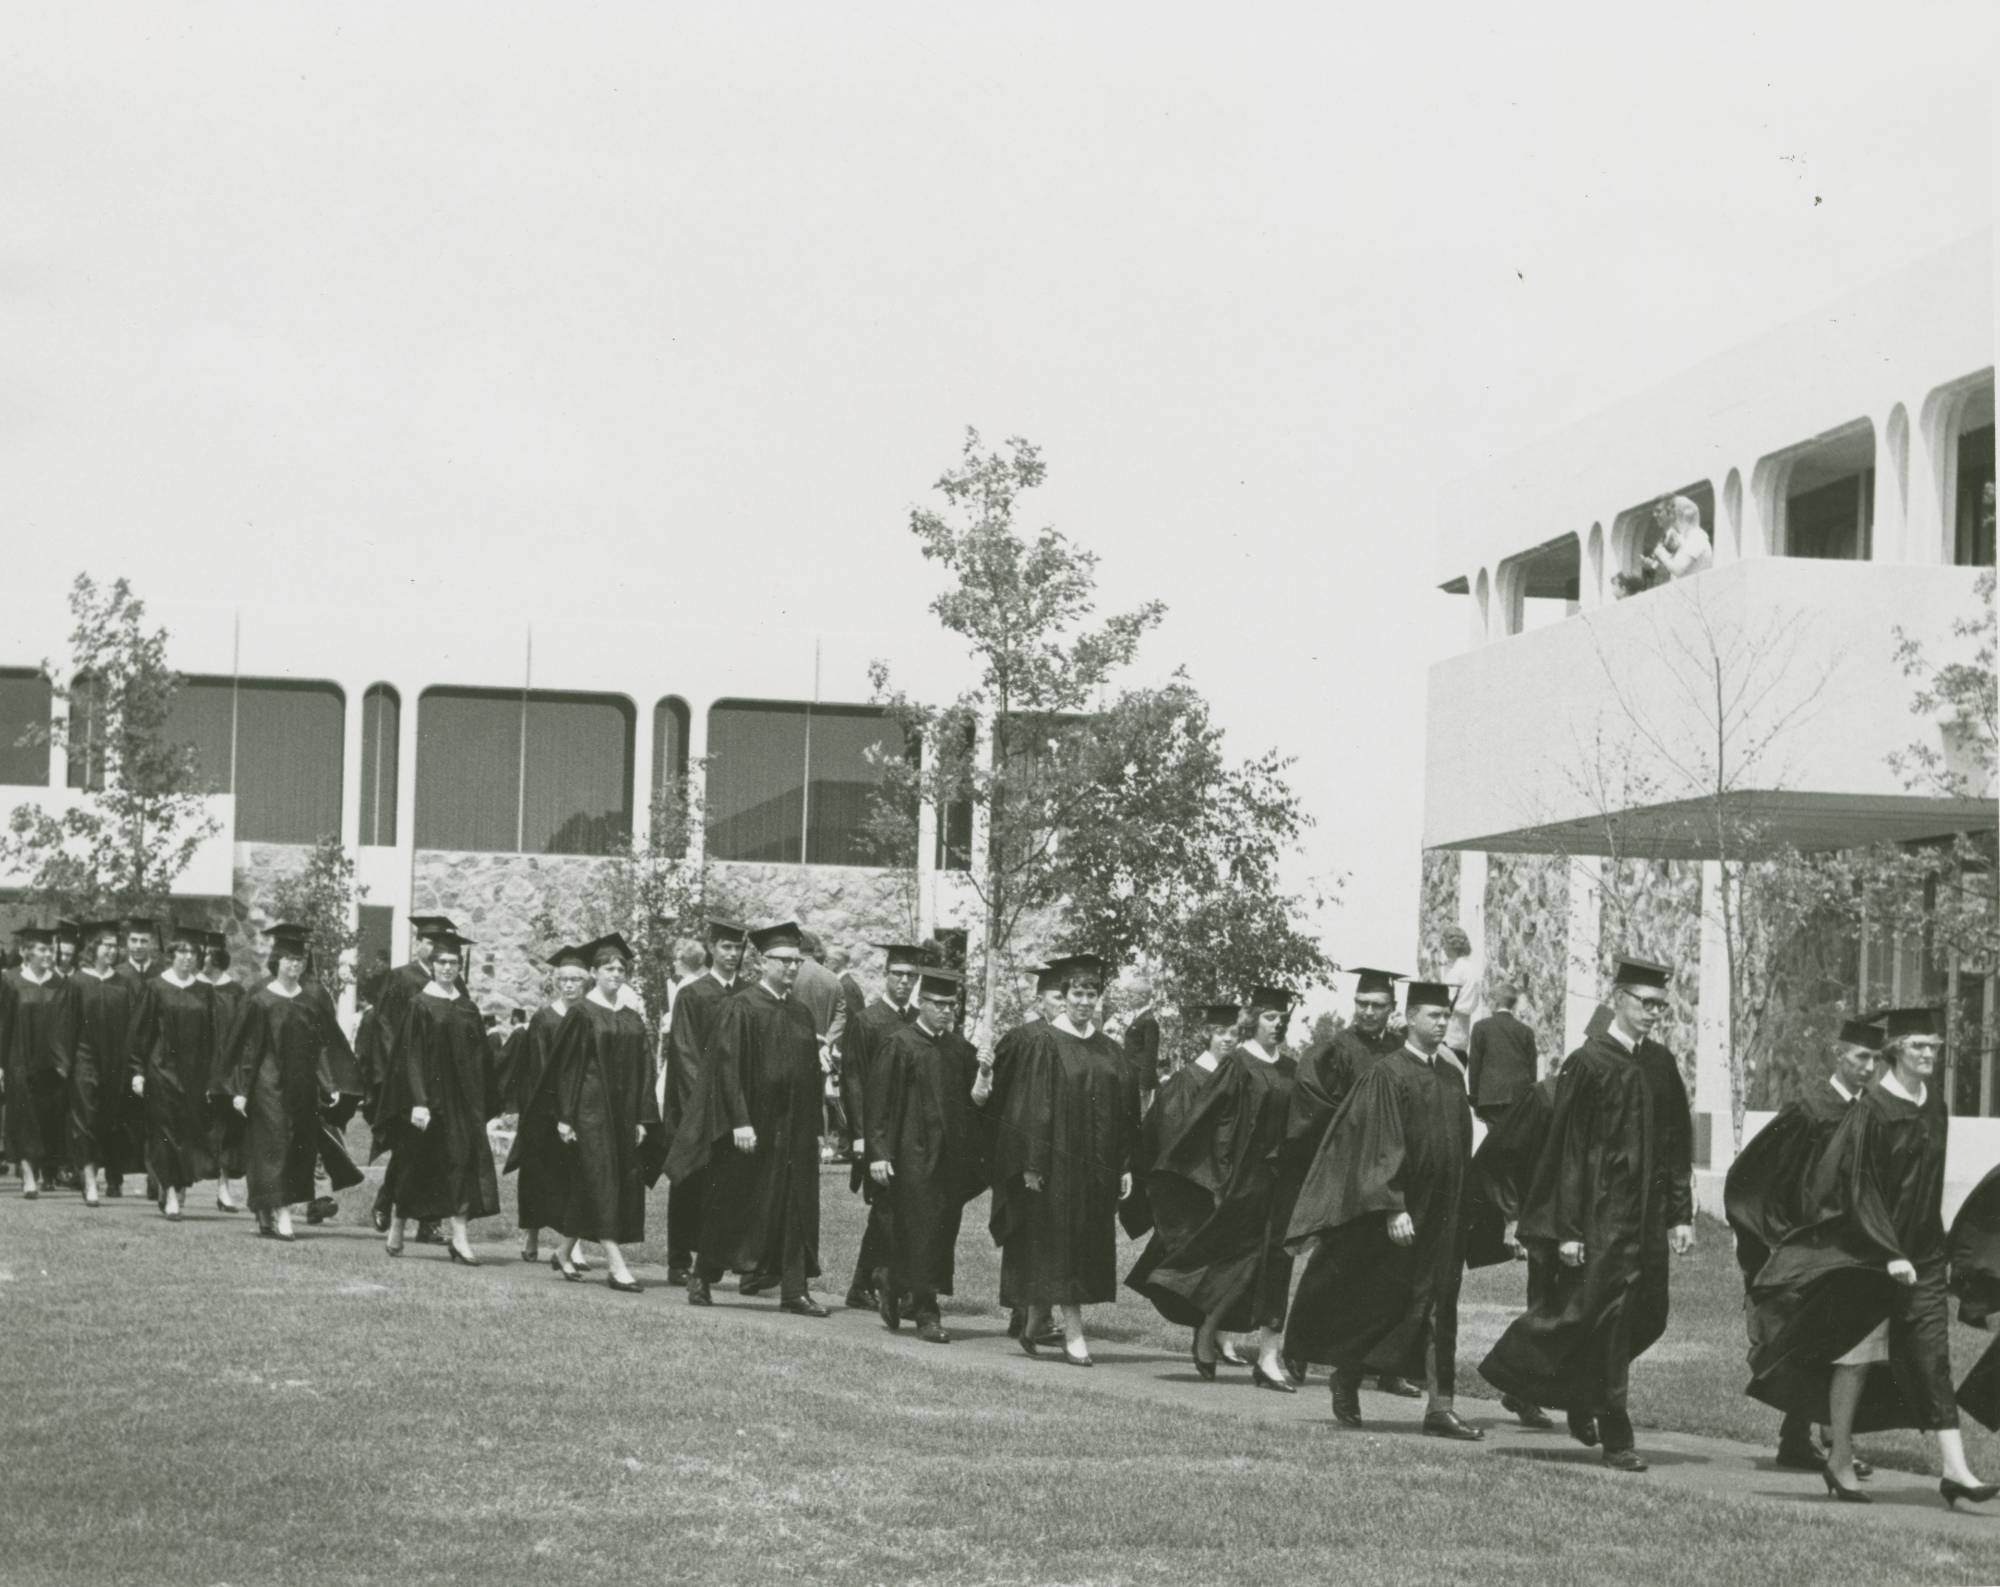 Students walking to their graduation.